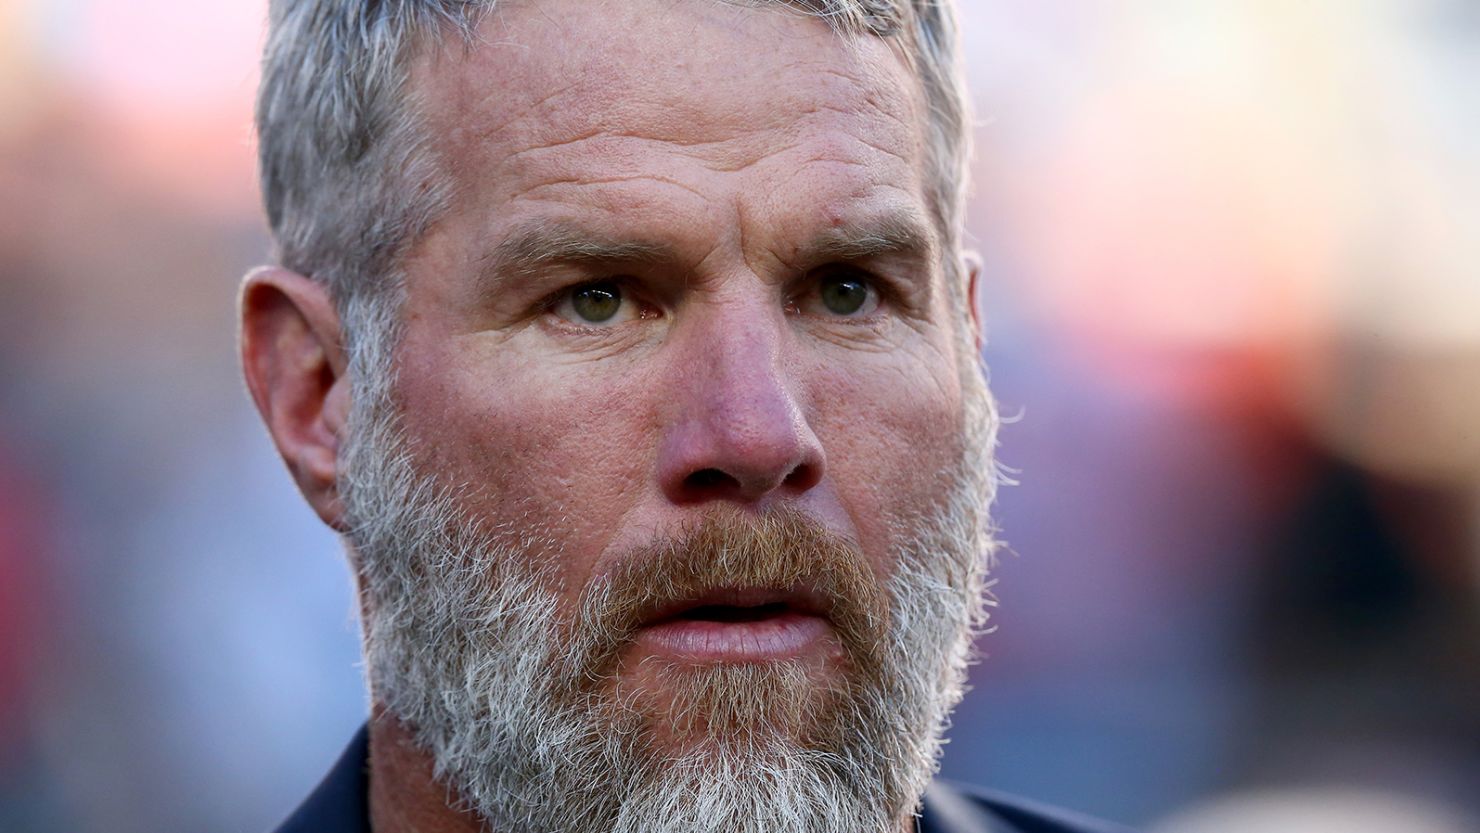 Former NFL player Brett Favre looks on prior to Super Bowl 50 between the Denver Broncos and the Carolina Panthers at Levi's Stadium on February 7, 2016 in Santa Clara, California. 